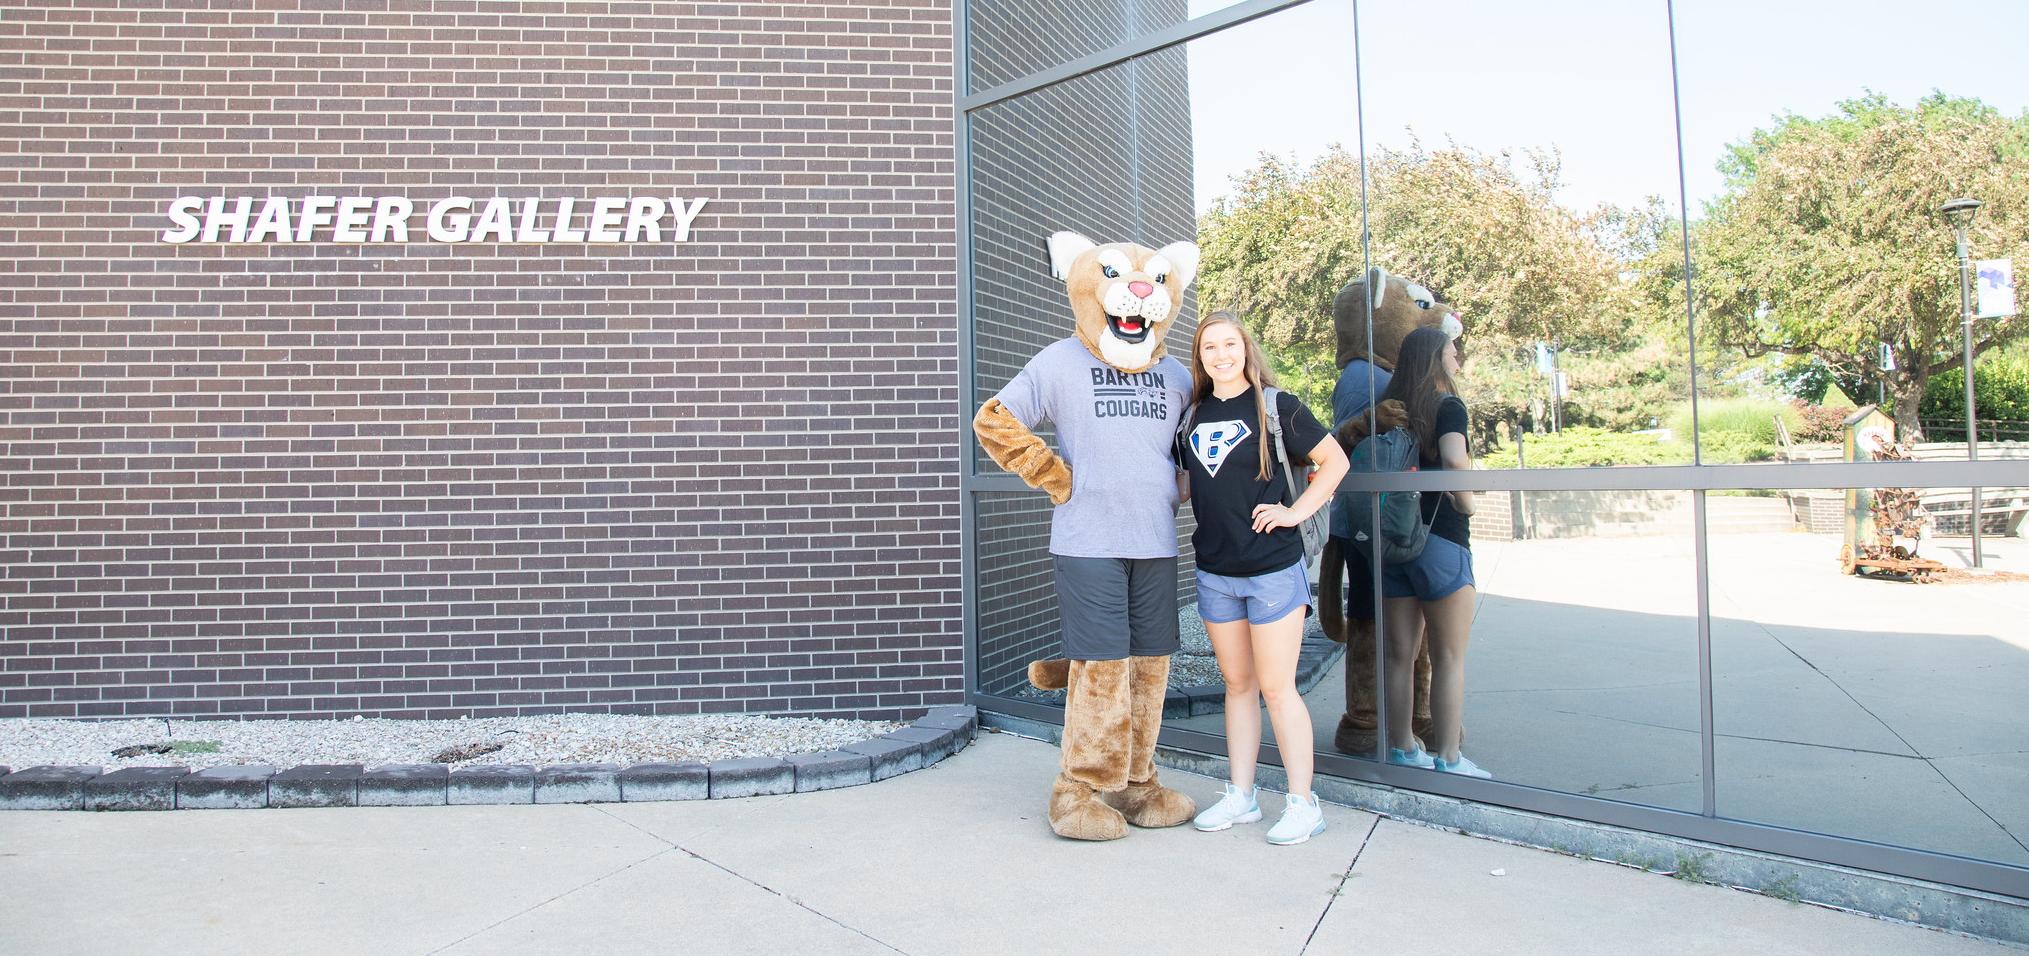 Bart with a student by the Shafer Gallery